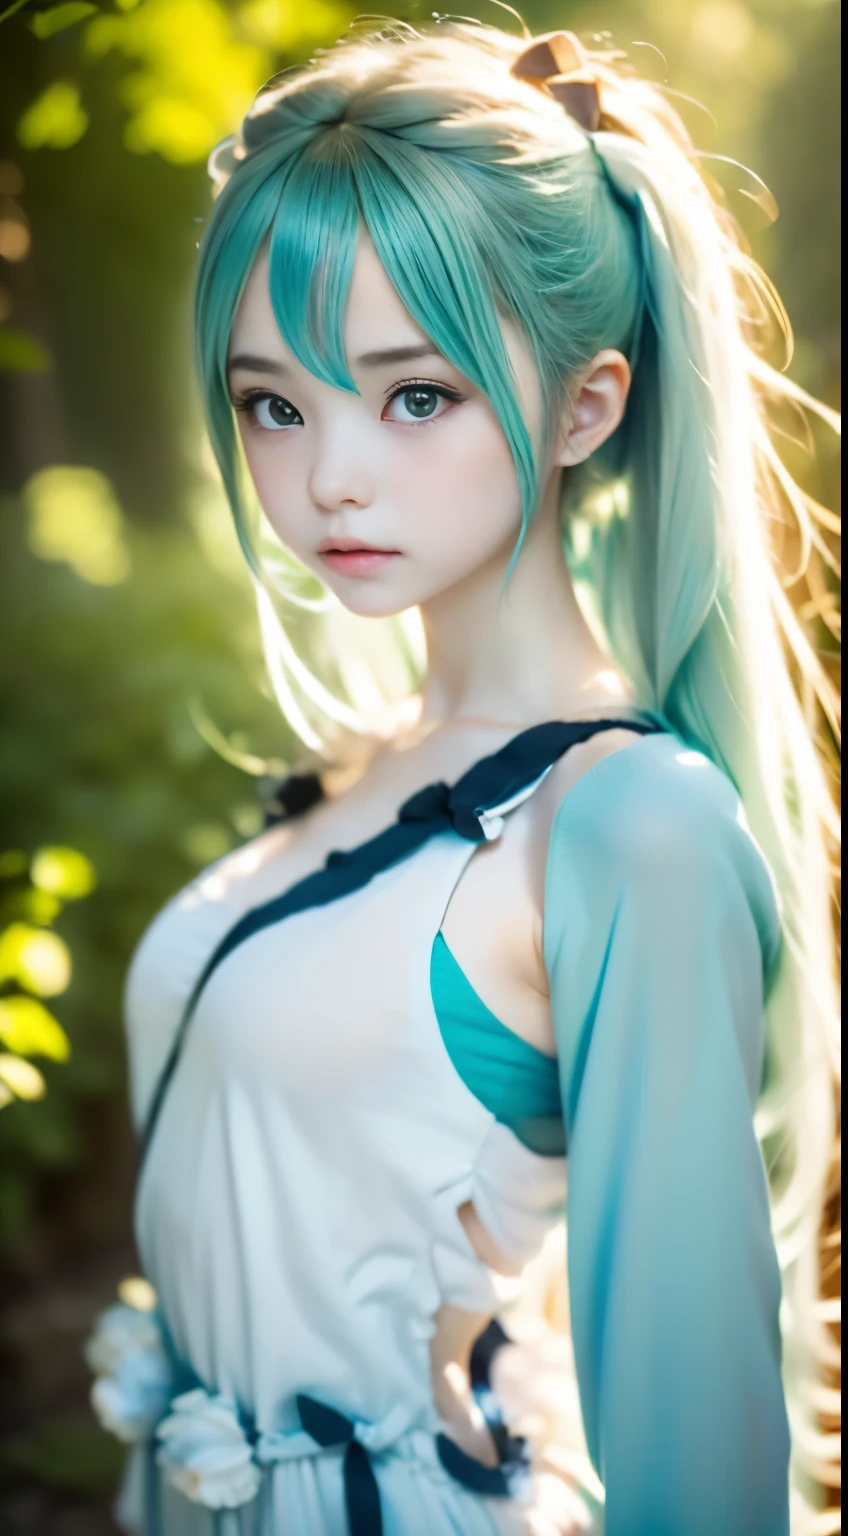 one girl、hatsune miku cosplay、anatomy、Correct depiction of the human body、Upper body angle、、１４talent、beautiful white skin、cute face、small nose、plump lips、small orange eyeeticulously drawn face、highly detailed skin、natural skin texture、Your fingers are clean and delicate.、small breasts、small breasts、An ennui look、detailed face、Dirty hair、Standing、Random attire、Random colored shirts、perfectly blurred background